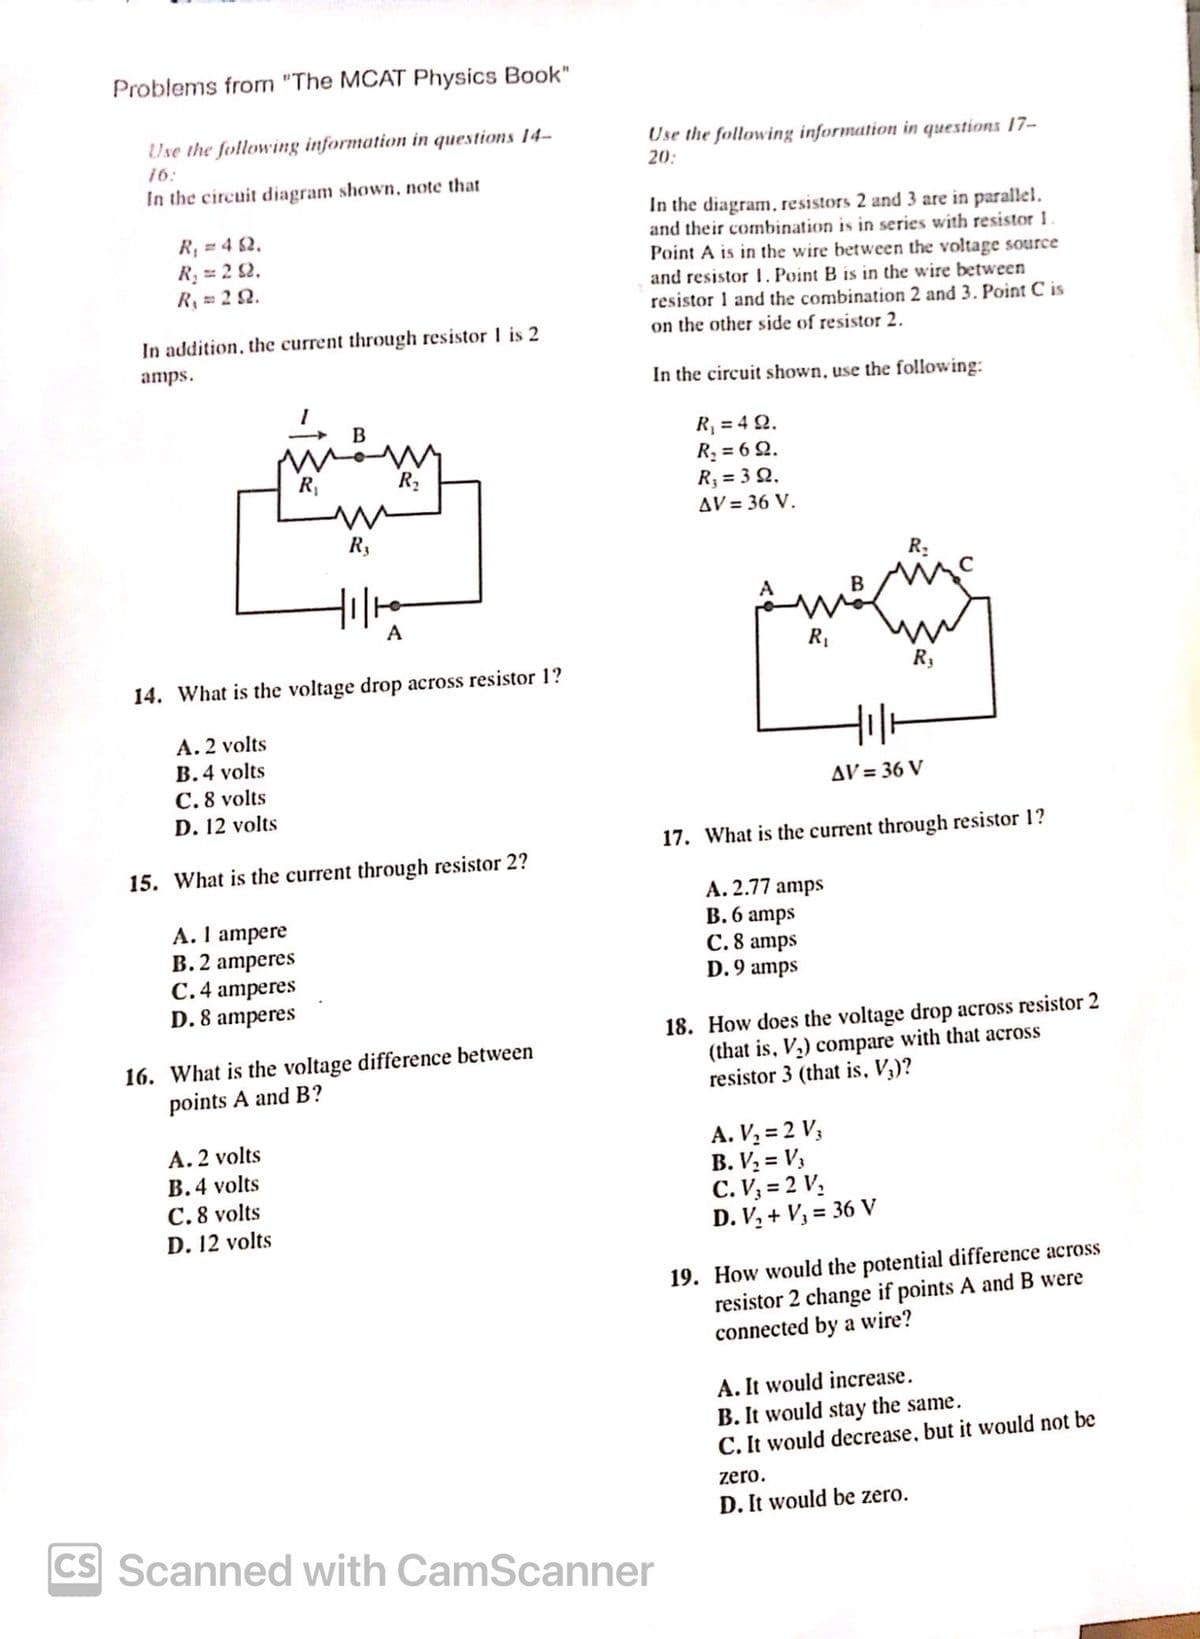 Problems from "The MCAT Physics Book"
Use the following information in questions 14-
16:
In the circuit diagram shown, note that
R₁ = 42.
R₁ = 22.
R₁ = 29.
In addition, the current through resistor 1 is 2
amps.
Use the following information in questions 17-
20:
In the diagram, resistors 2 and 3 are in parallel.
and their combination is in series with resistor 1.
Point A is in the wire between the voltage source
and resistor 1. Point B is in the wire between
resistor 1 and the combination 2 and 3. Point C is
on the other side of resistor 2.
In the circuit shown, use the following:
R₁ = 4 Q2.
R₁
B
R₁
R₁₂
A
14. What is the voltage drop across resistor 1?
A. 2 volts
B.4 volts
R₁ = 69.
R₁ = 30.
AV = 36 V.
R₁
B
R₁
R₁
C.8 volts
D. 12 volts
15. What is the current through resistor 2?
A. 1 ampere
B. 2 amperes
C. 4 amperes
D. 8 amperes
16. What is the voltage difference between
points A and B?
A. 2 volts
B. 4 volts
C.8 volts
D. 12 volts
CS Scanned with CamScanner
AV=36 V
17. What is the current through resistor 1?
A. 2.77 amps
B. 6 amps
C. 8 amps
D. 9 amps
18. How does the voltage drop across resistor 2
(that is, V₁) compare with that across
resistor 3 (that is, V₁)?
A. V₁ = 2 V3
B. V₂ = V3
C. V₁ = 2 V₁
D. V₂+ V₁ = 36 V
19. How would the potential difference across
resistor 2 change if points A and B were
connected by a wire?
A. It would increase.
B. It would stay the same.
C. It would decrease, but it would not be
zero.
D. It would be zero.